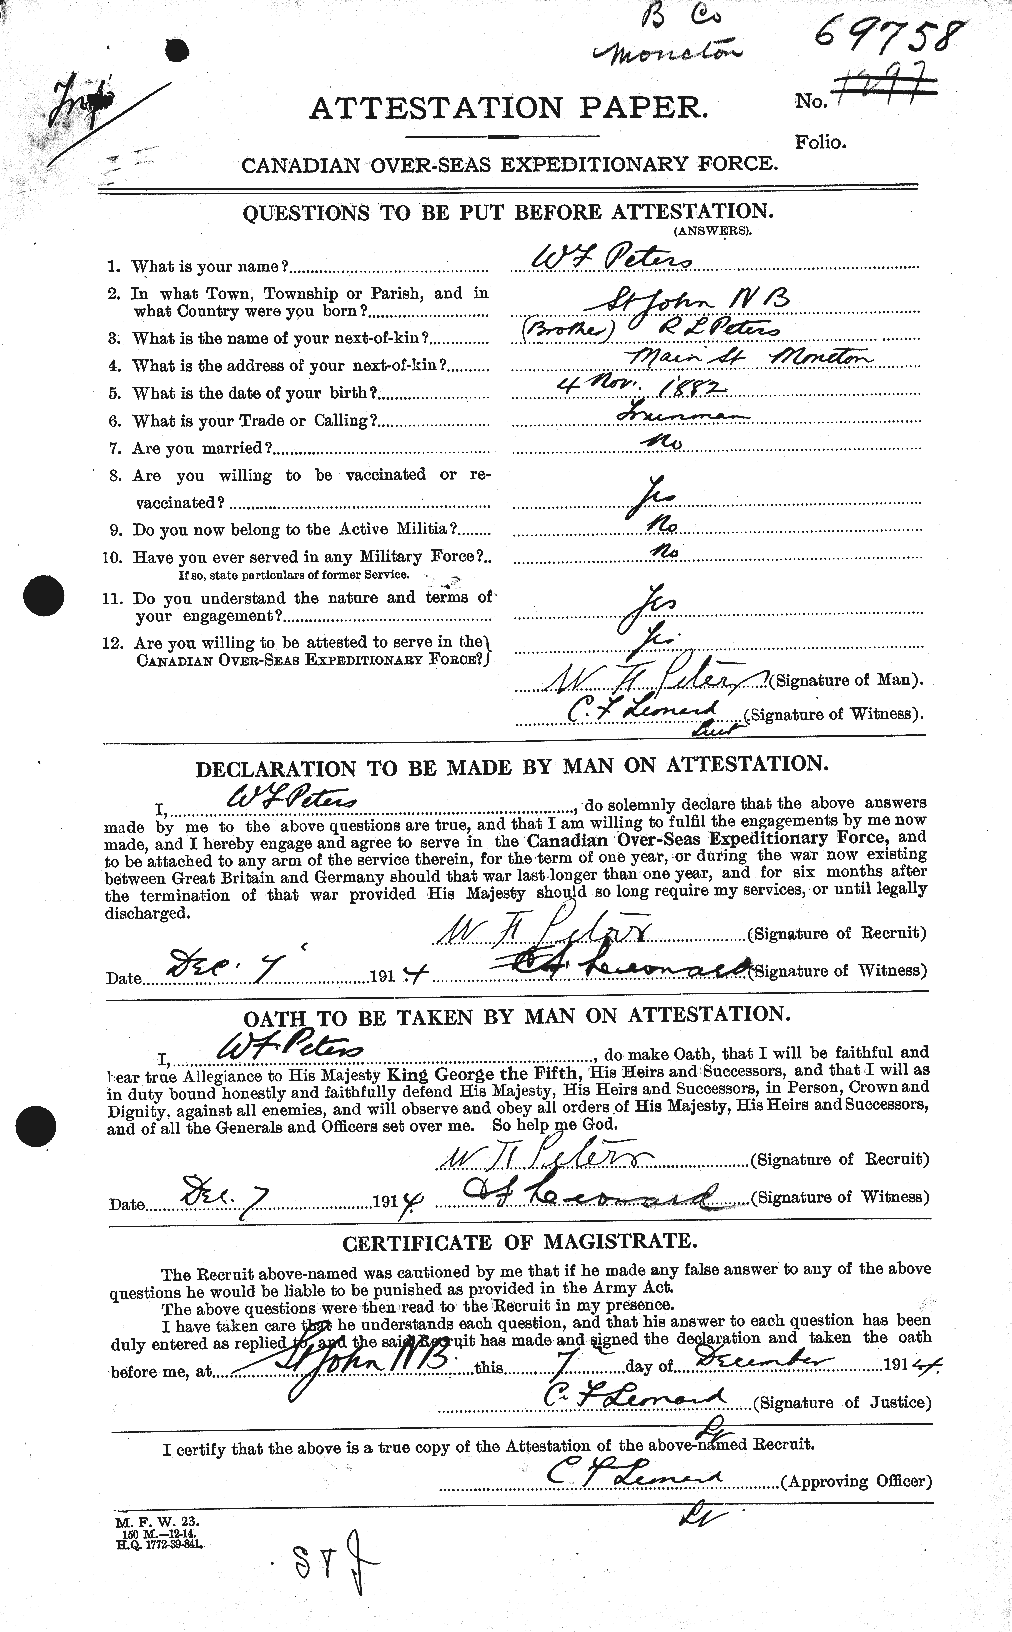 Personnel Records of the First World War - CEF 575635a